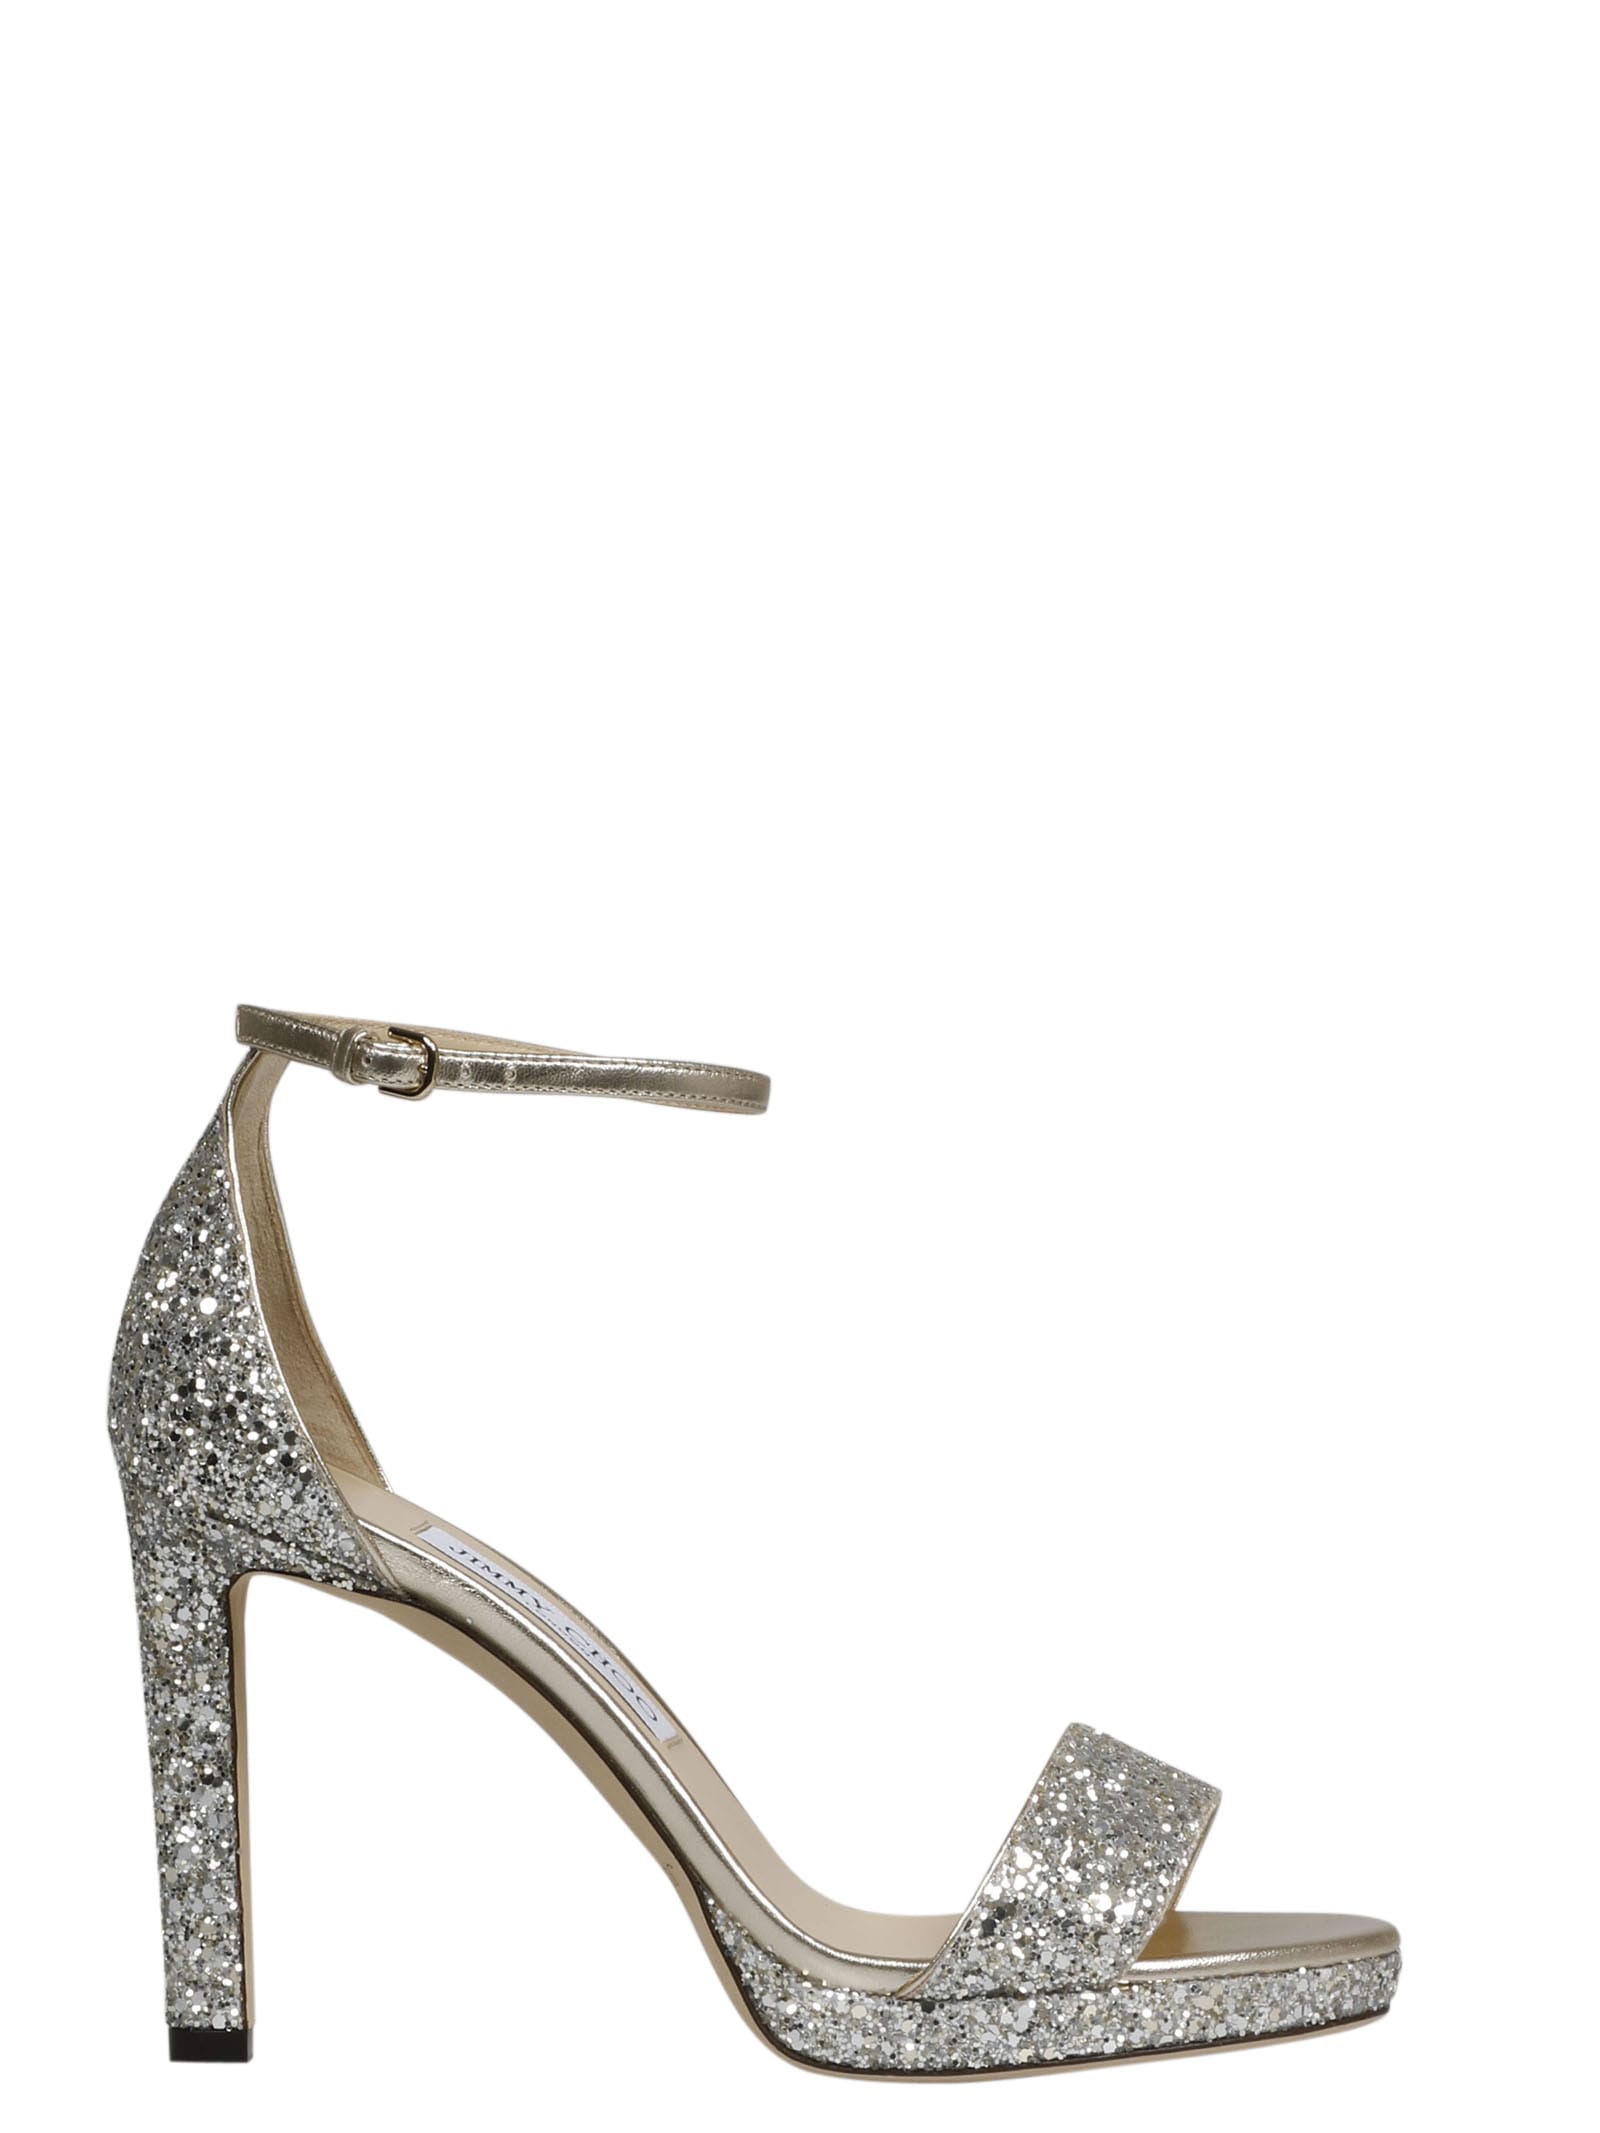 Buy Jimmy Choo Misty Sandals online, shop Jimmy Choo shoes with free shipping